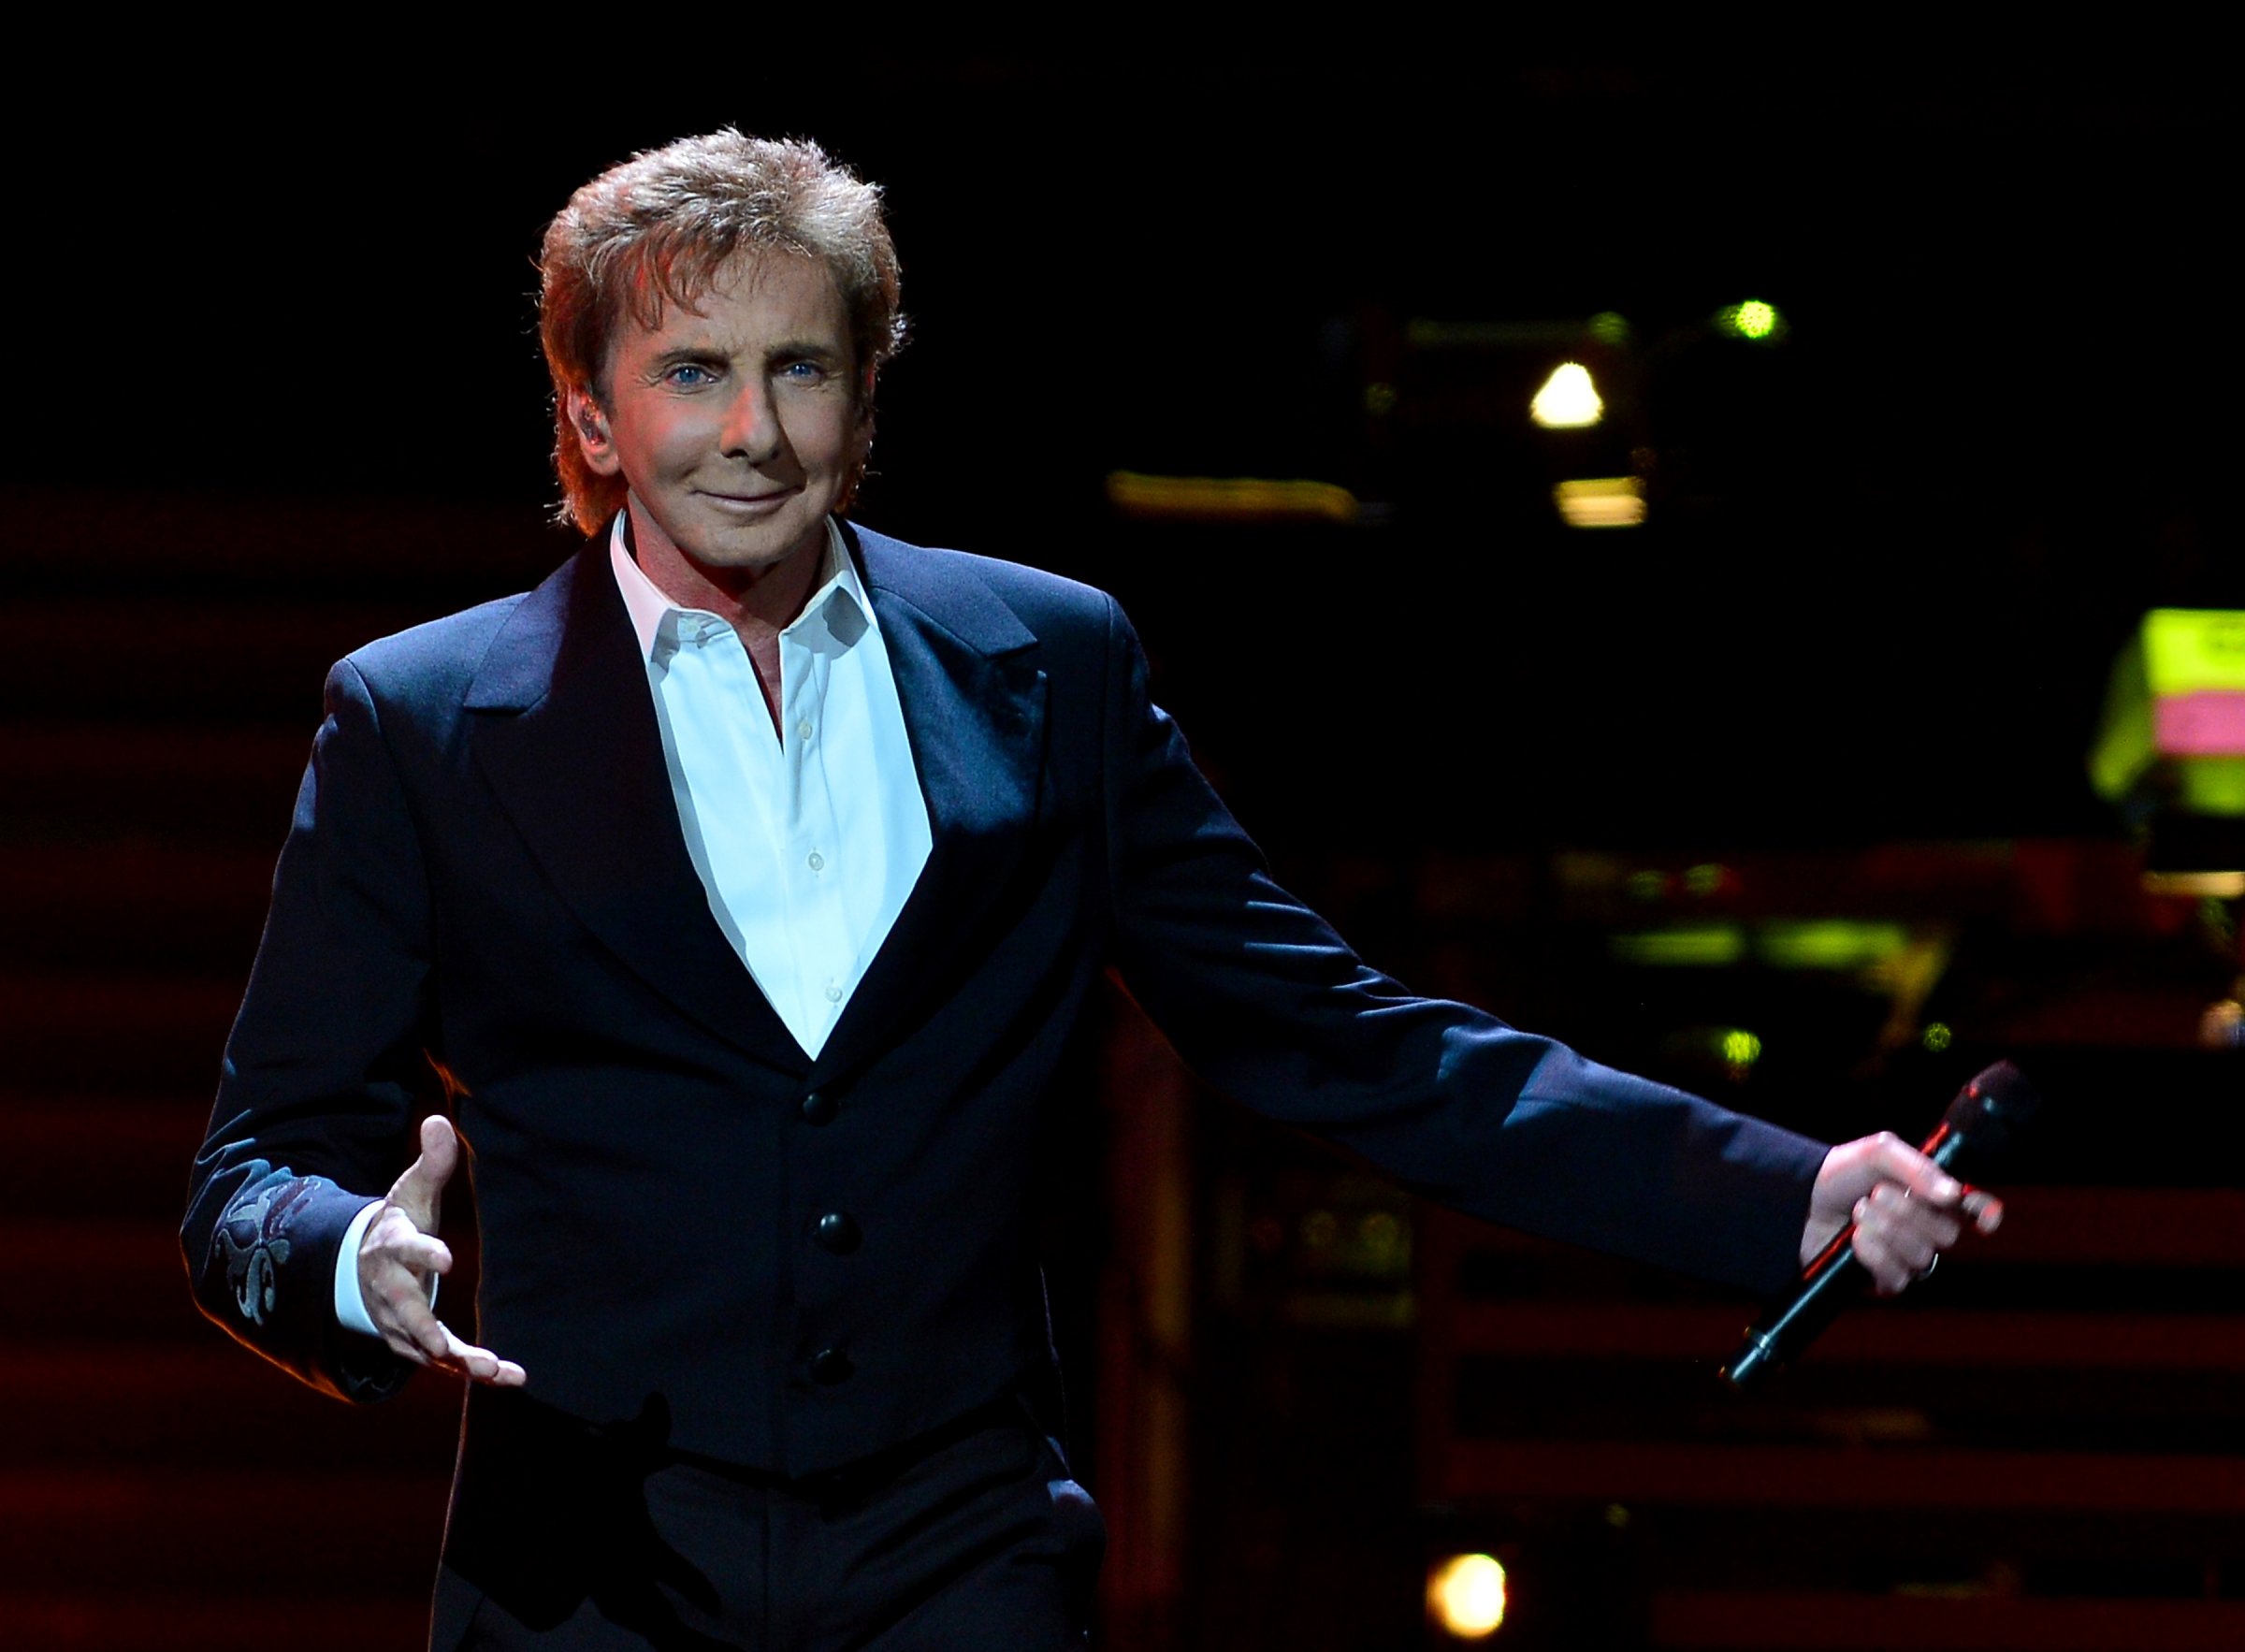 Barry Manilow performs during his One Last Time. at BB&T Center in Sunrise, Fl. on Feb. 5, 2016.